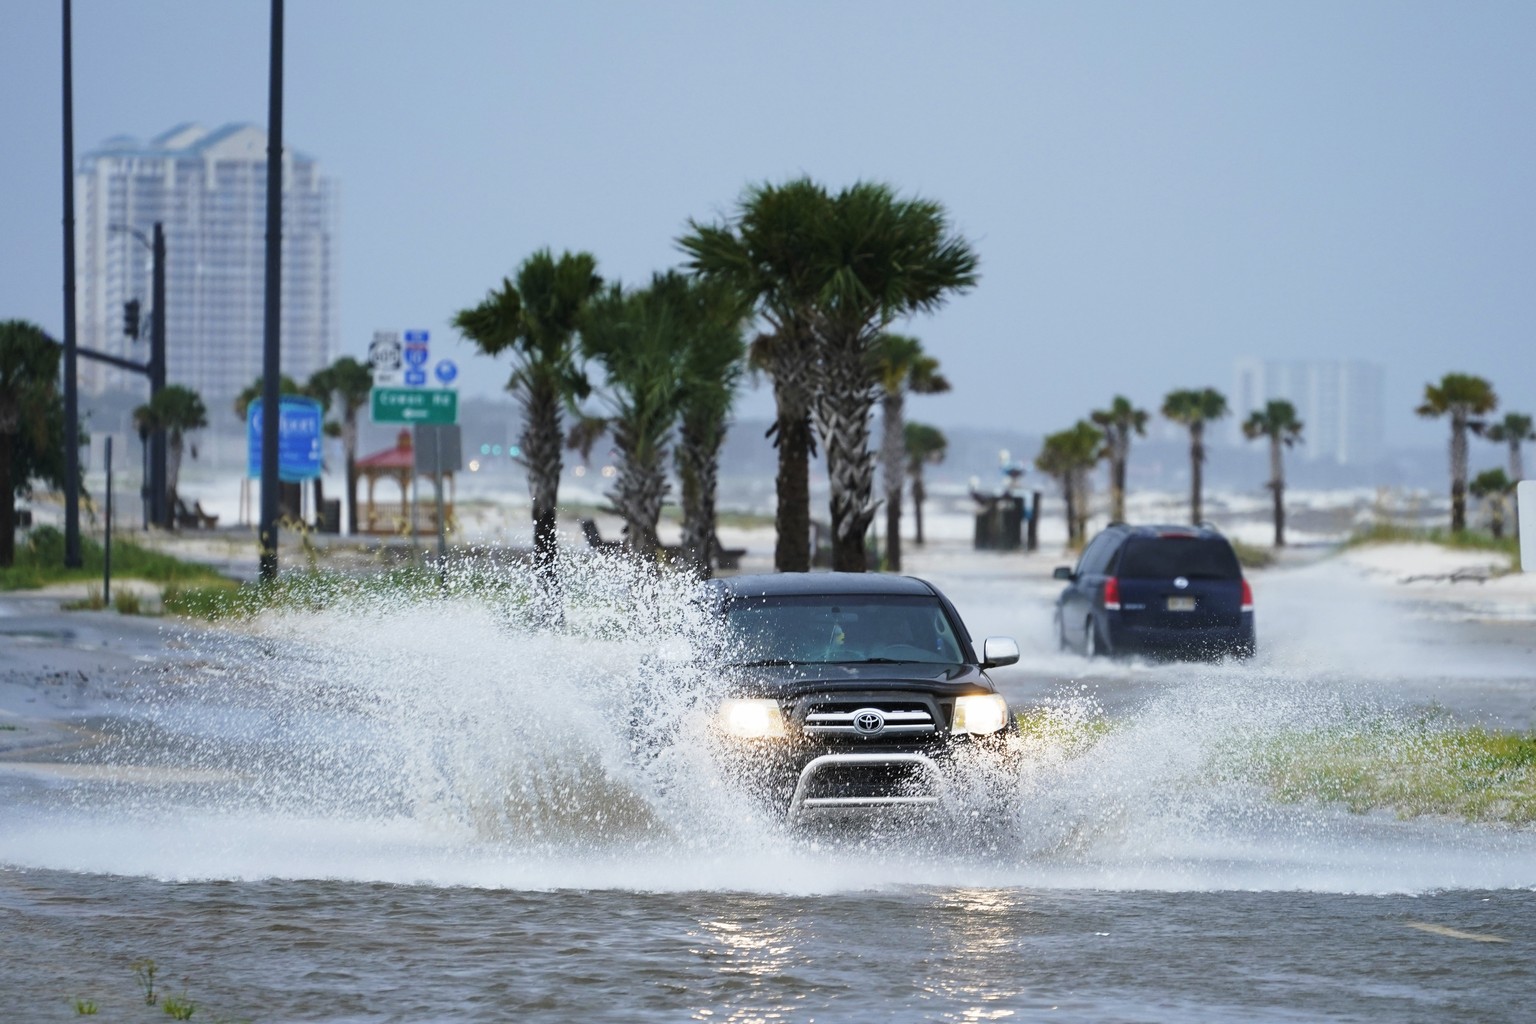 Cars drive through flood waters along route 90 as outer bands of Hurricane Ida arrive Sunday, Aug. 29, 2021, in Gulfport, Miss. (AP Photo/Steve Helber)